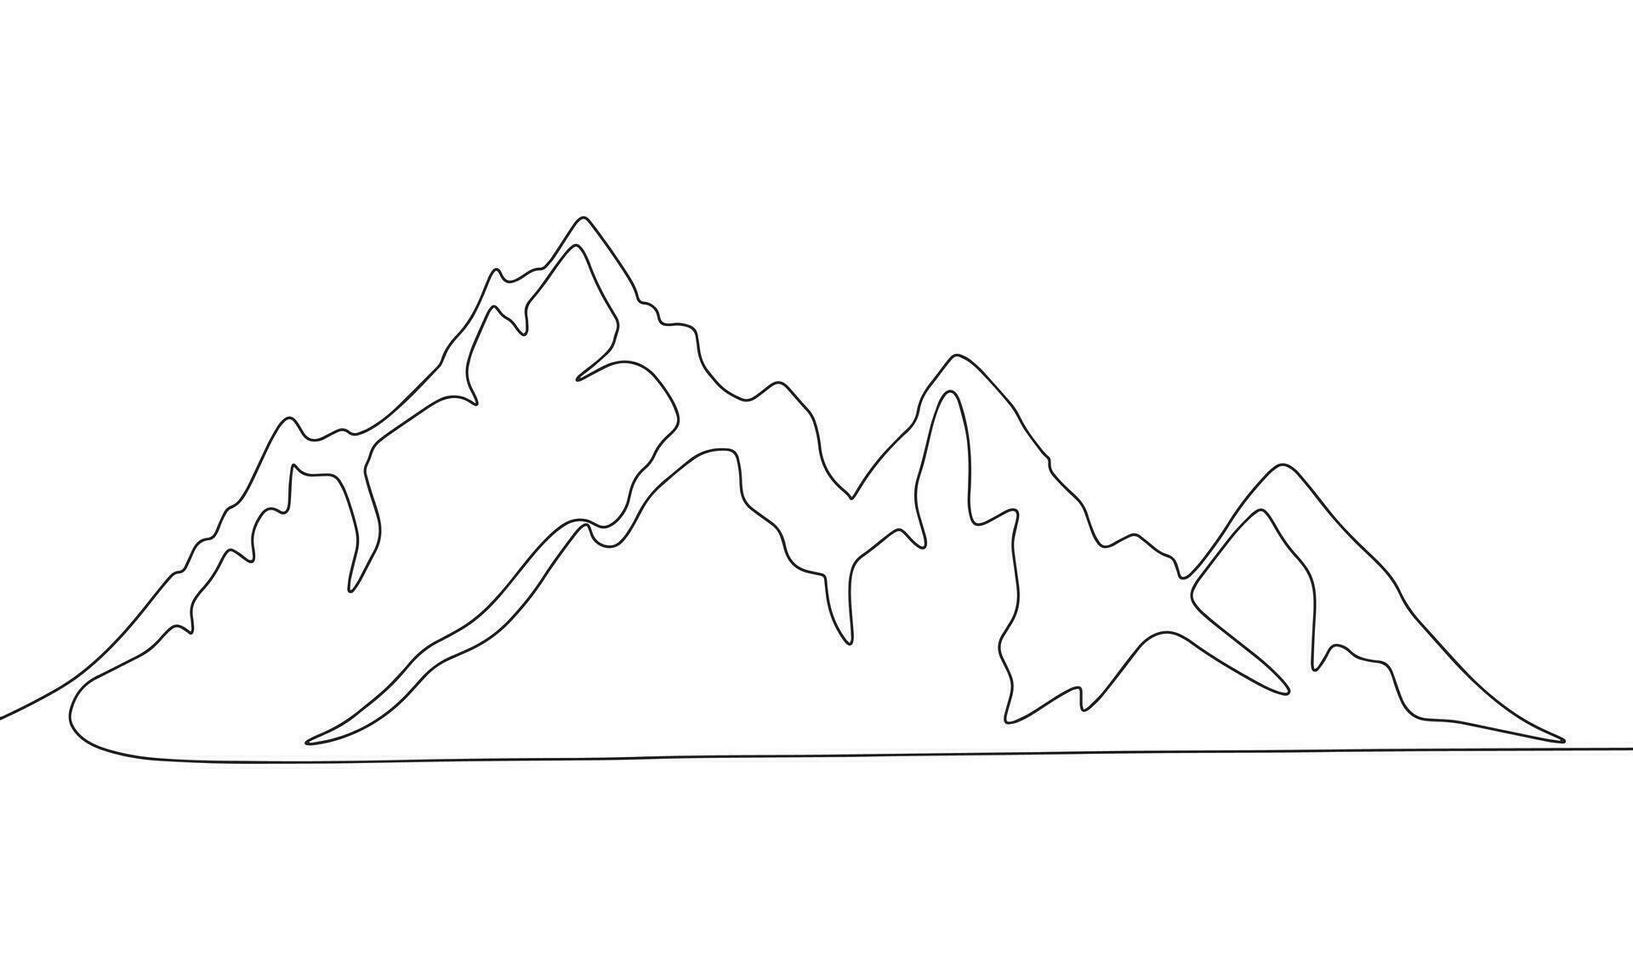 Continuous line drawing of mountains. Vector illustration as line art outline wallpaper for minimal poster, template, banner